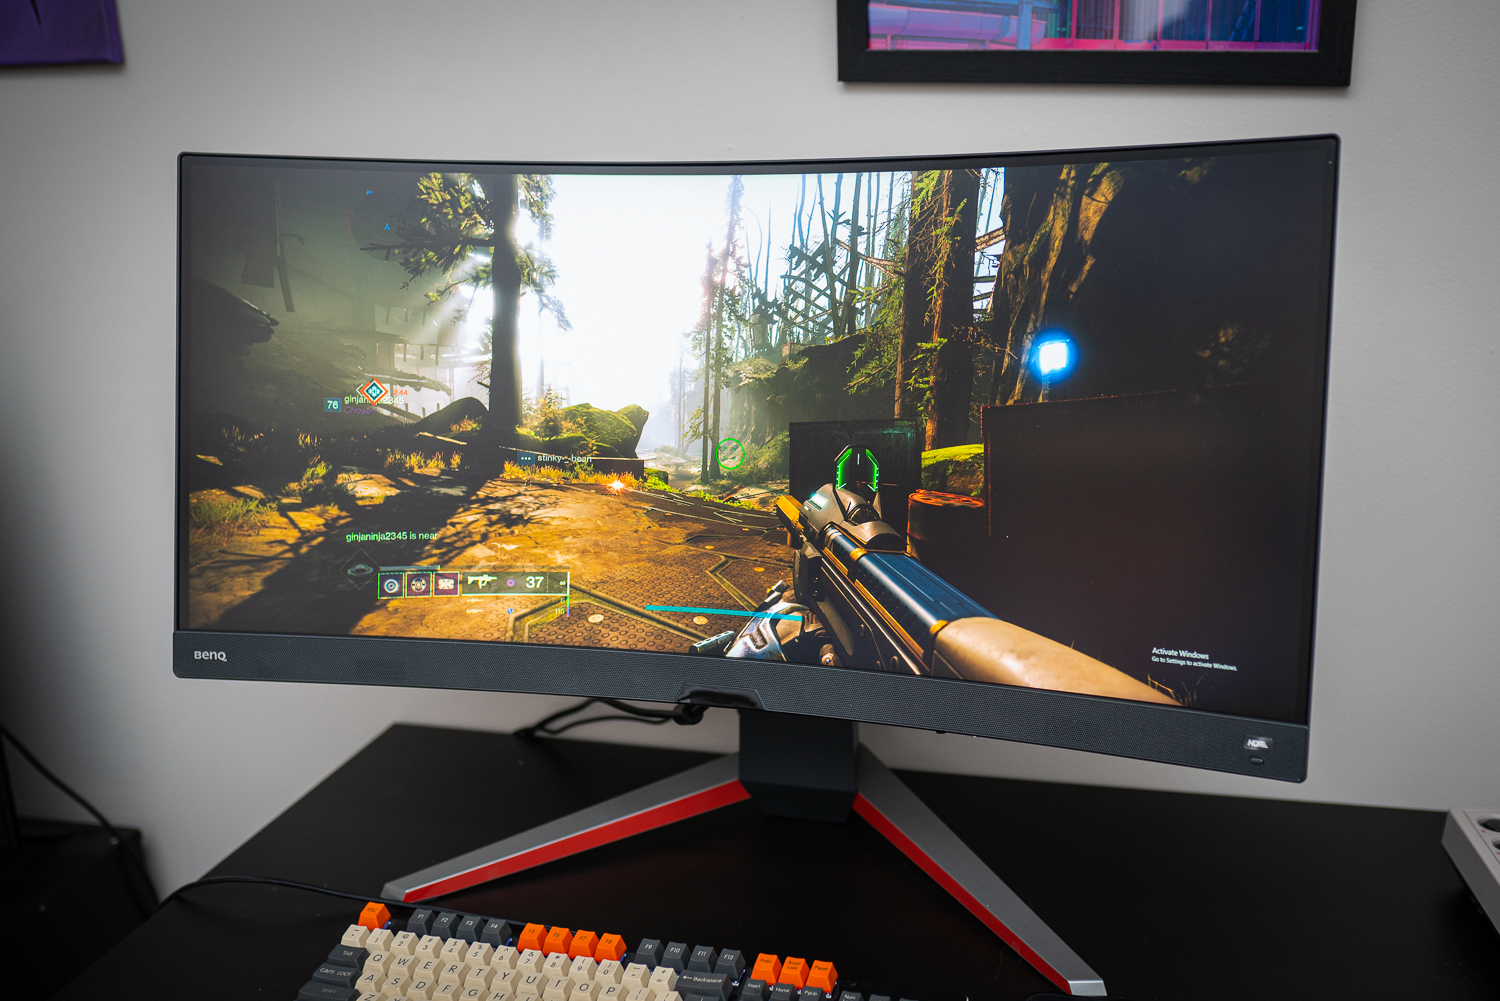 Gigabyte M32U Monitor Review: 4K Gaming Without the Fluff